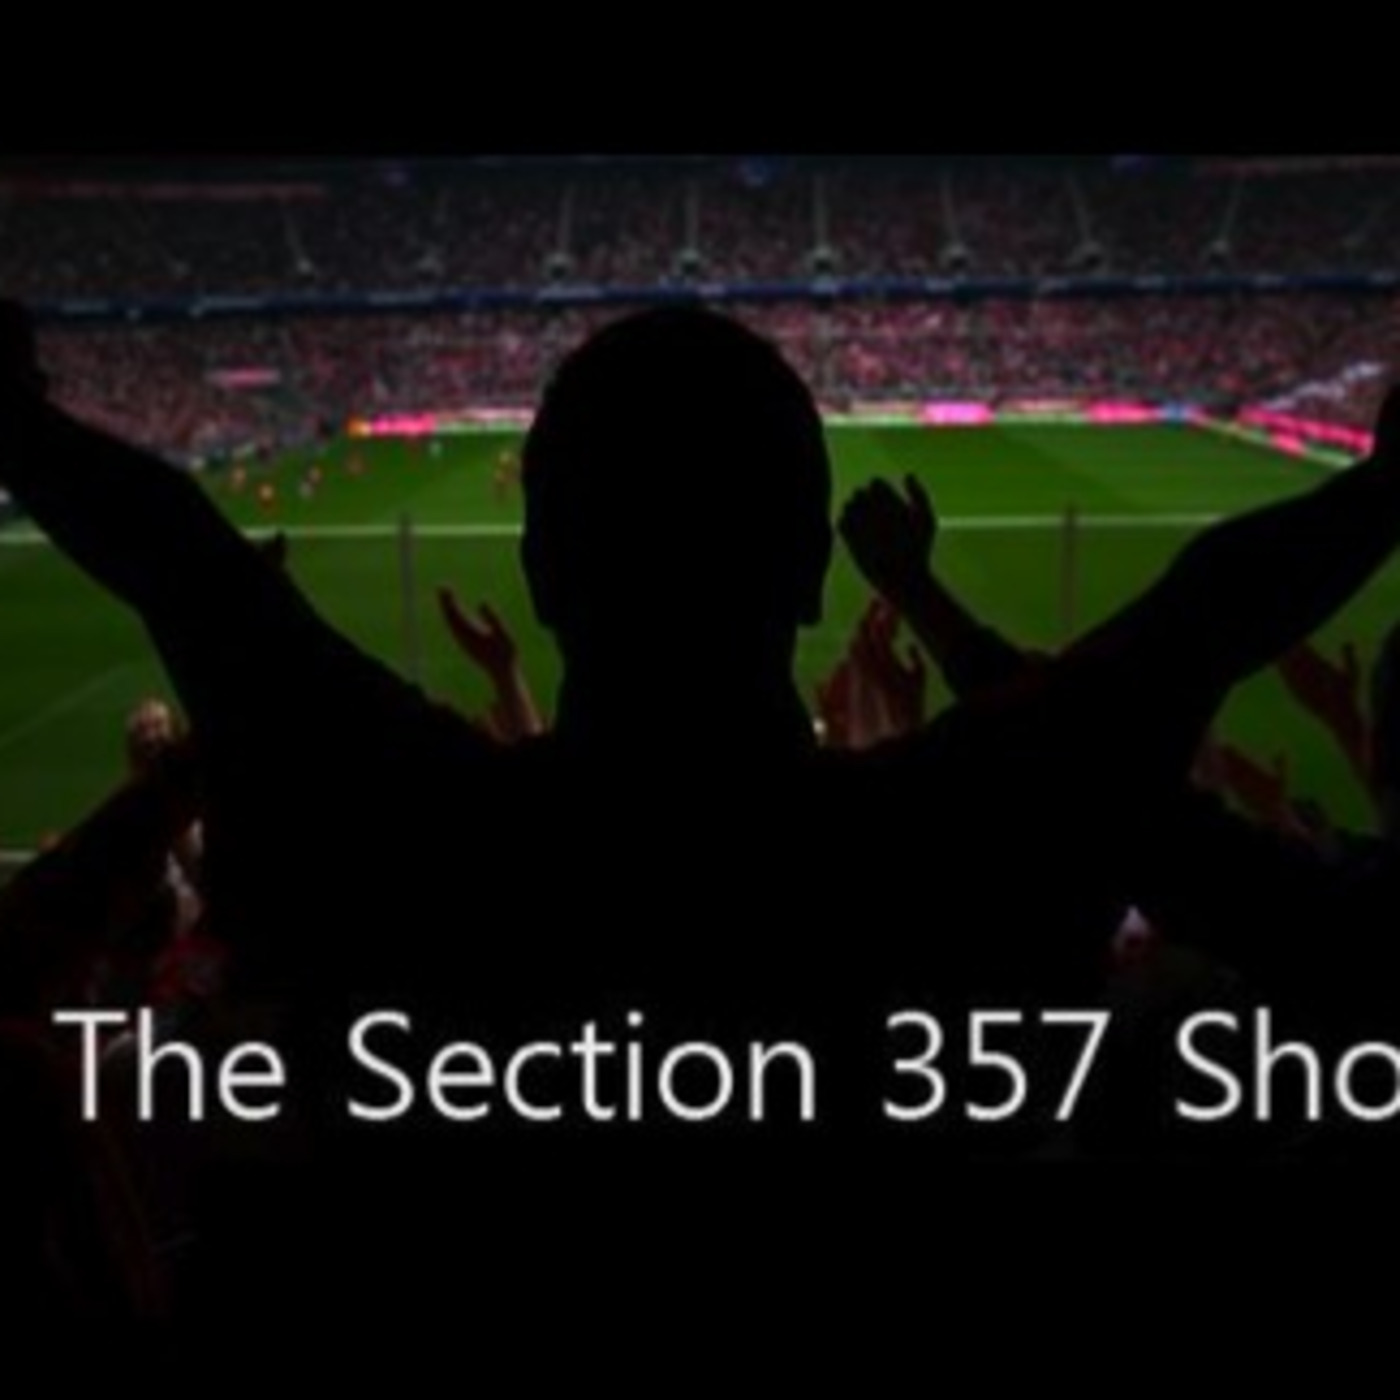 The Section 357 Show: The Ball Street Journal